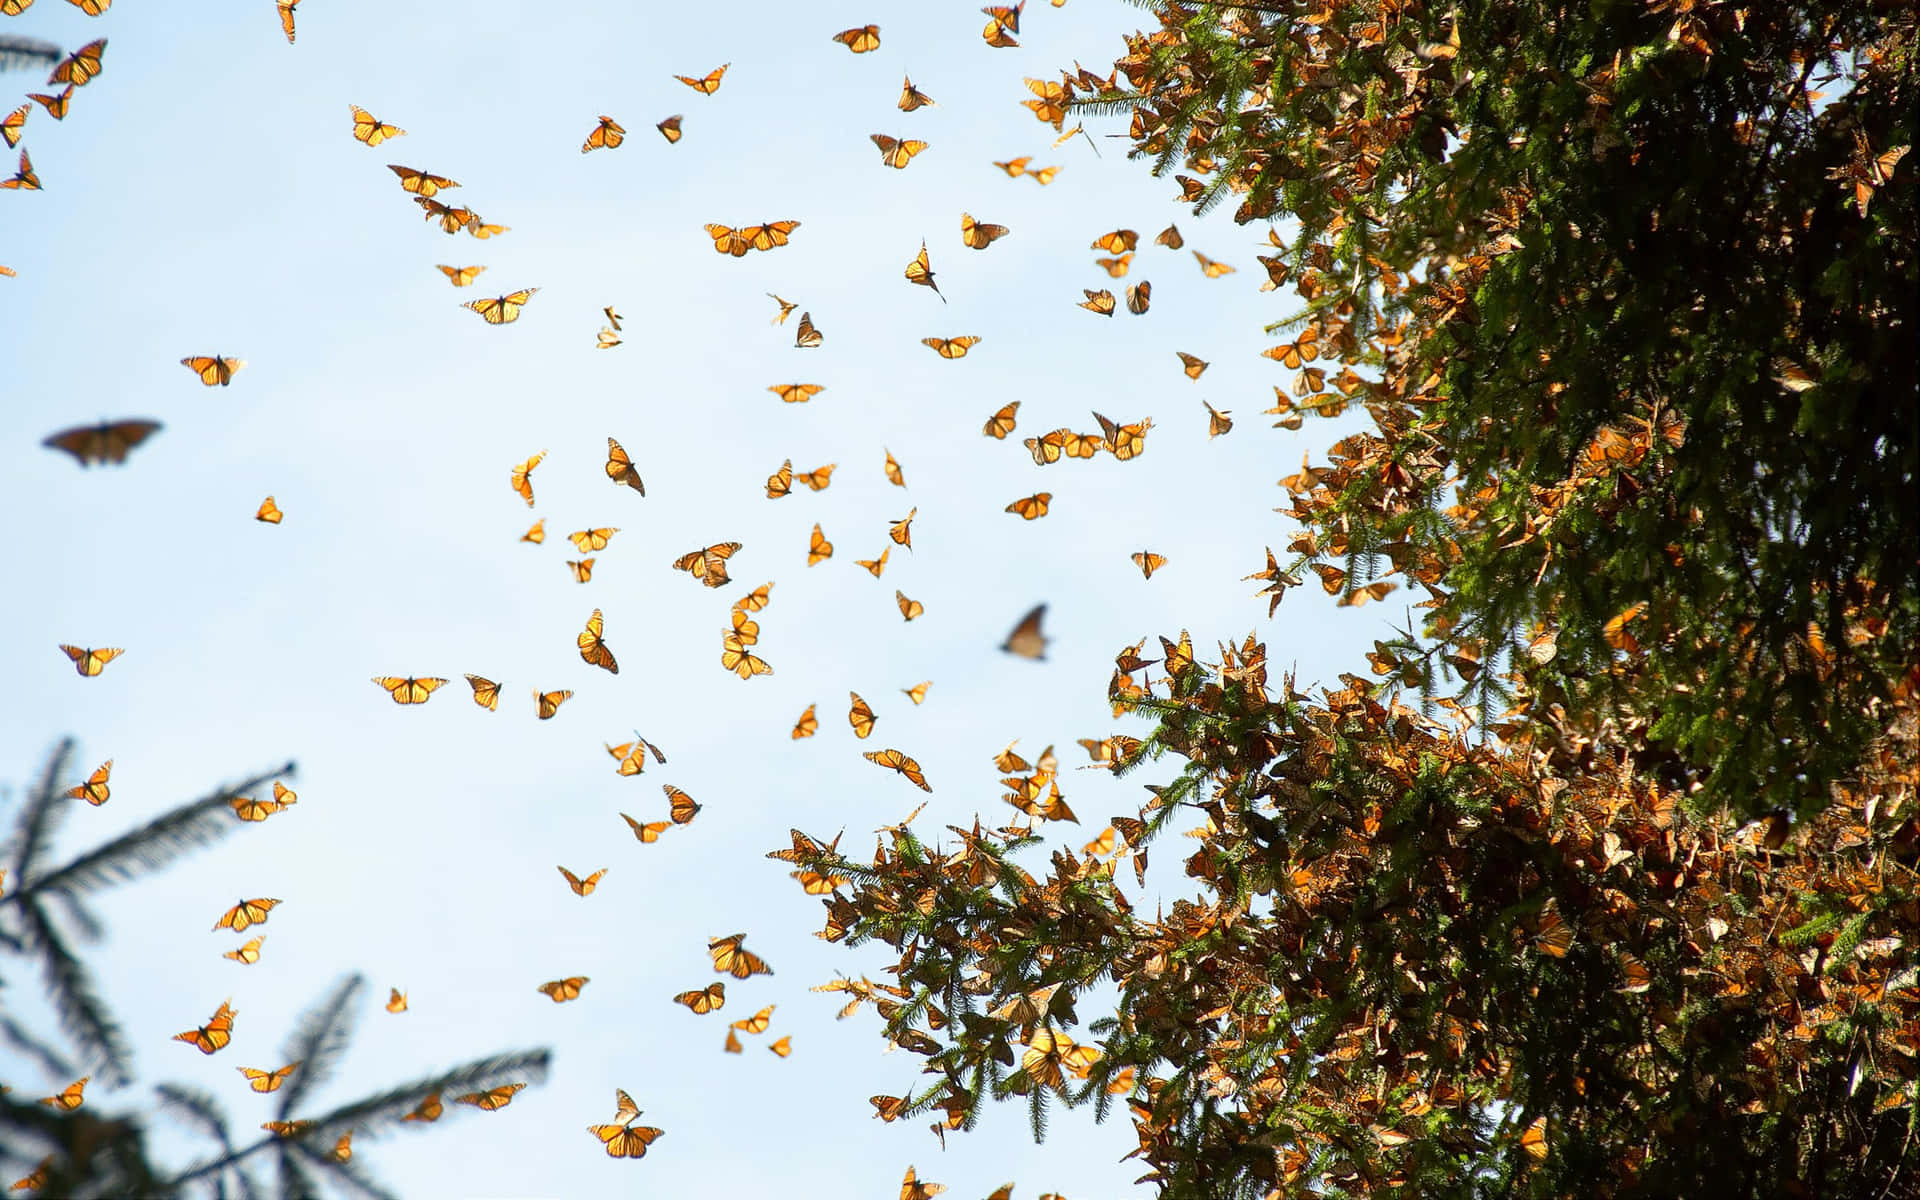 Hundreds of colorful butterflies fly across the sky in beautiful aerial migration Wallpaper